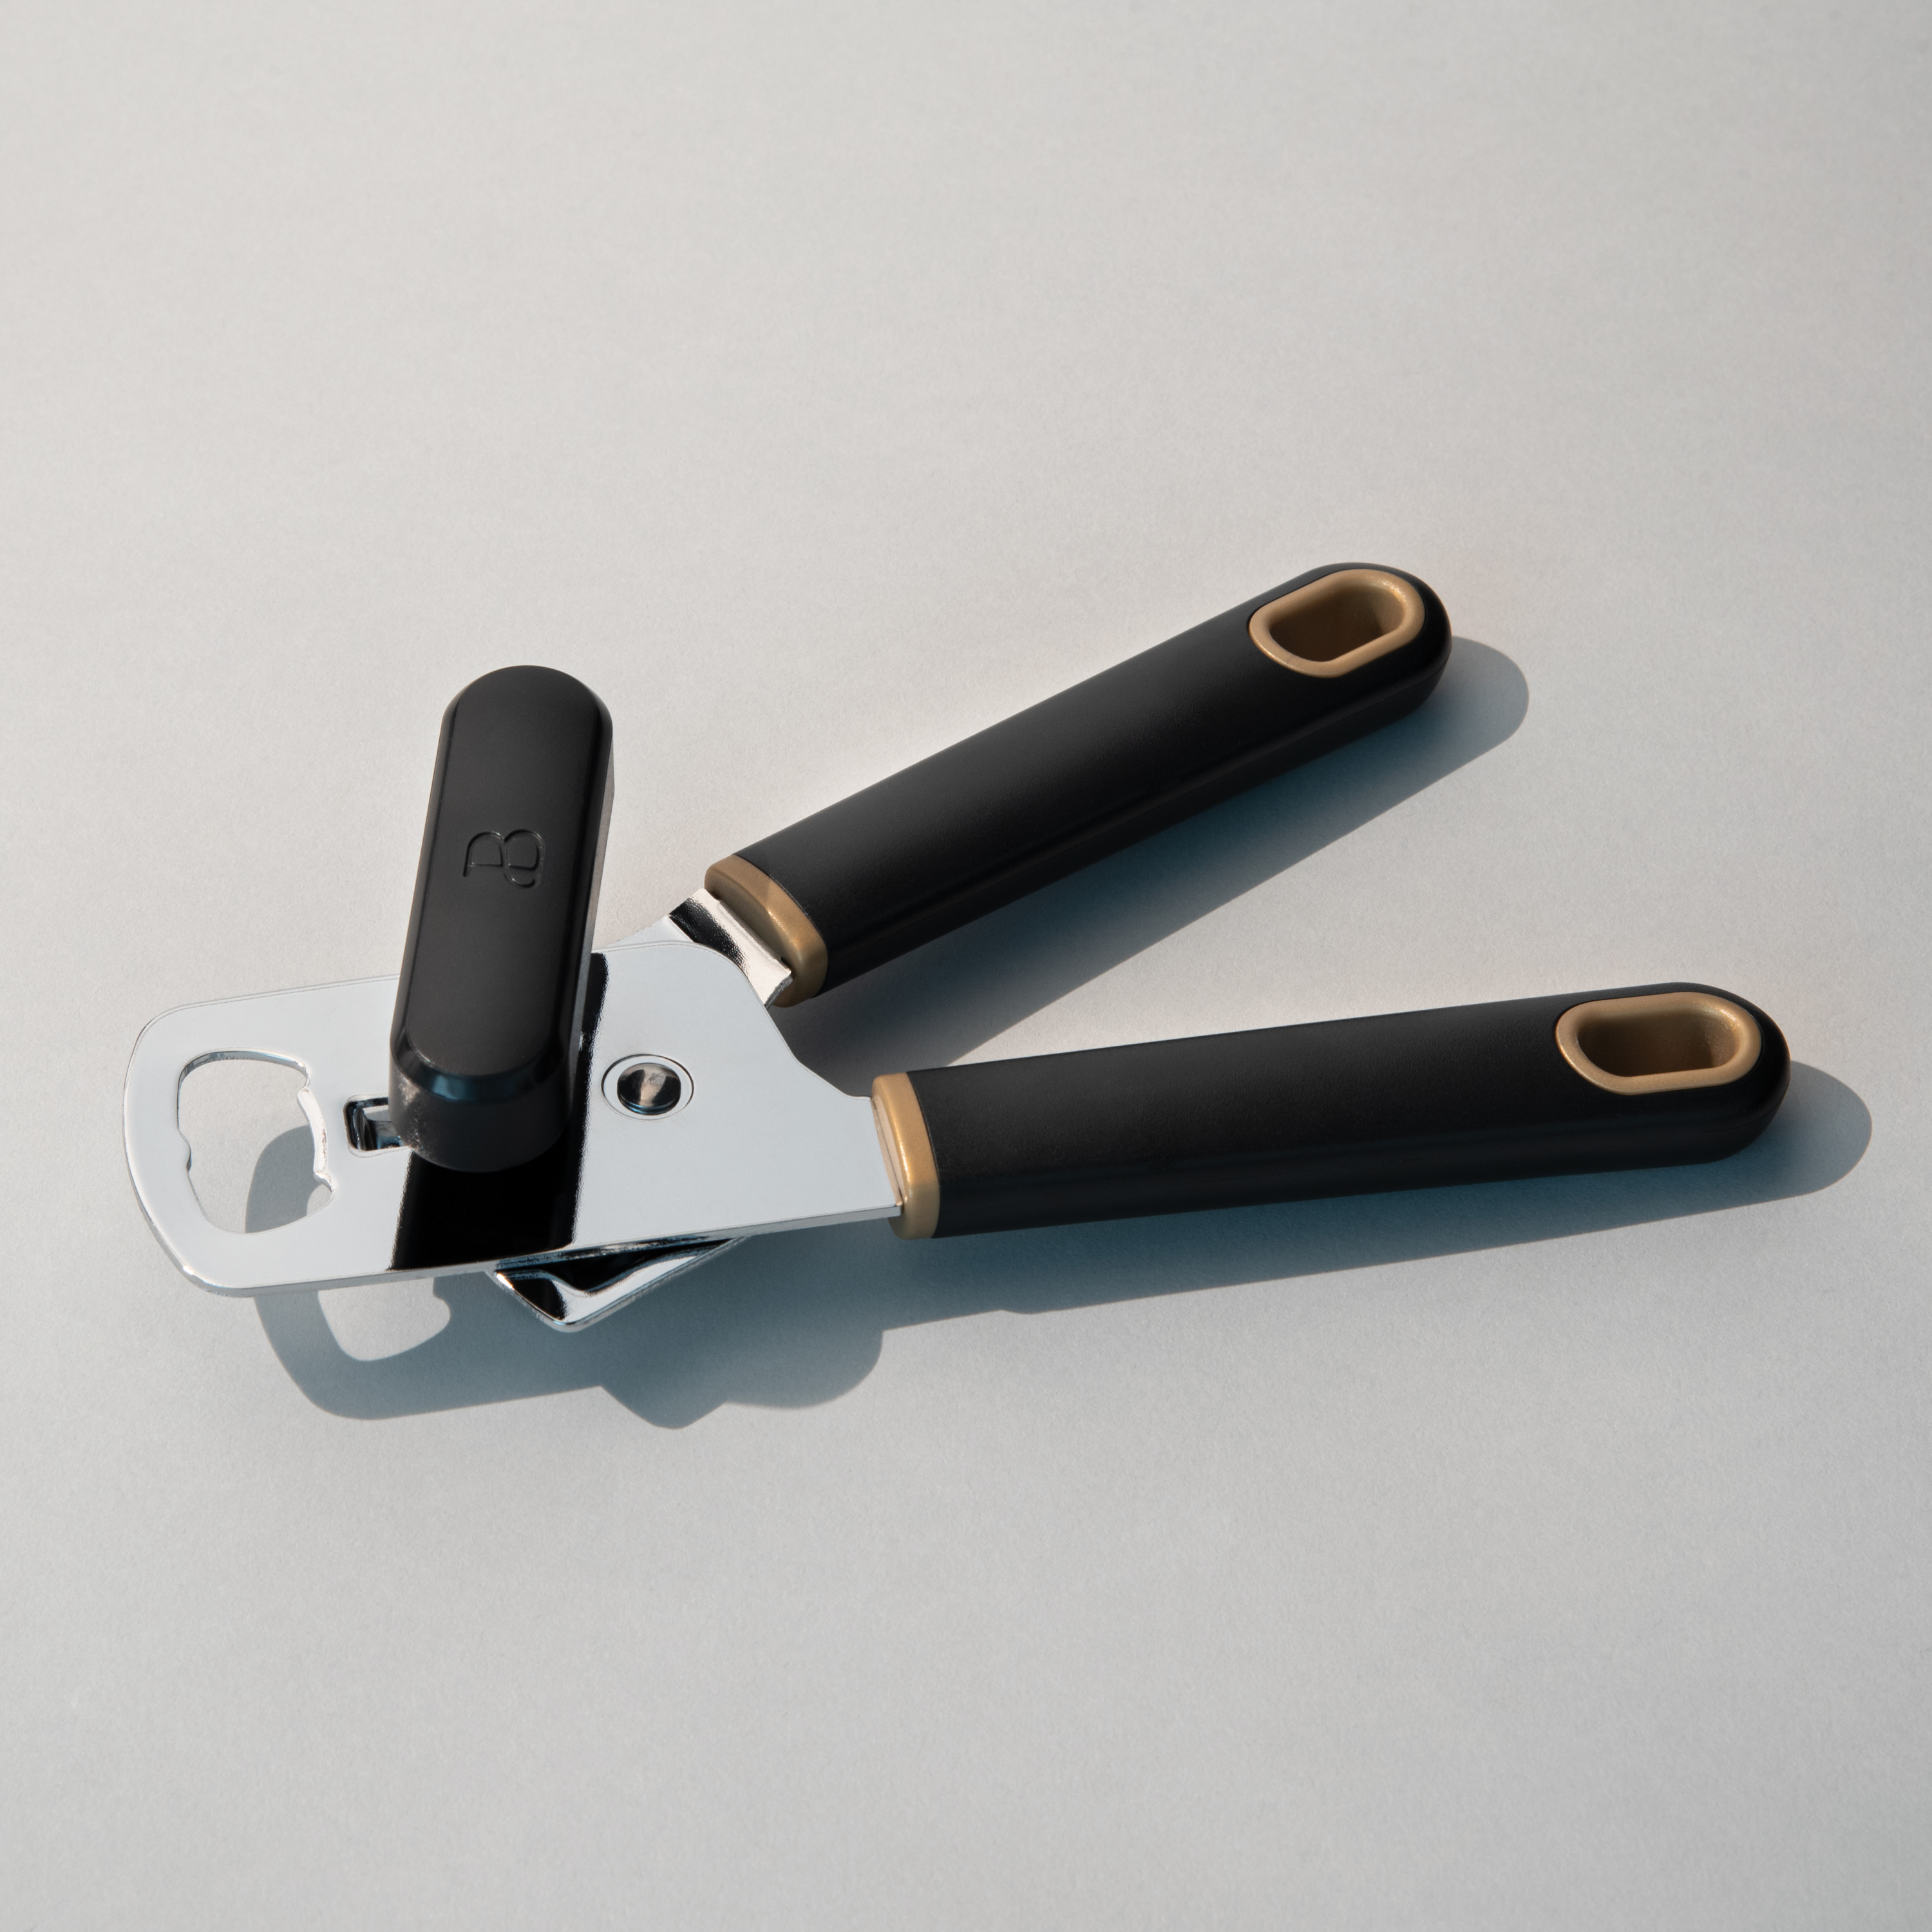 Beautiful Can Opener with Built in Bottle Opener in Black Sesame by Drew Barrymore - image 3 of 7